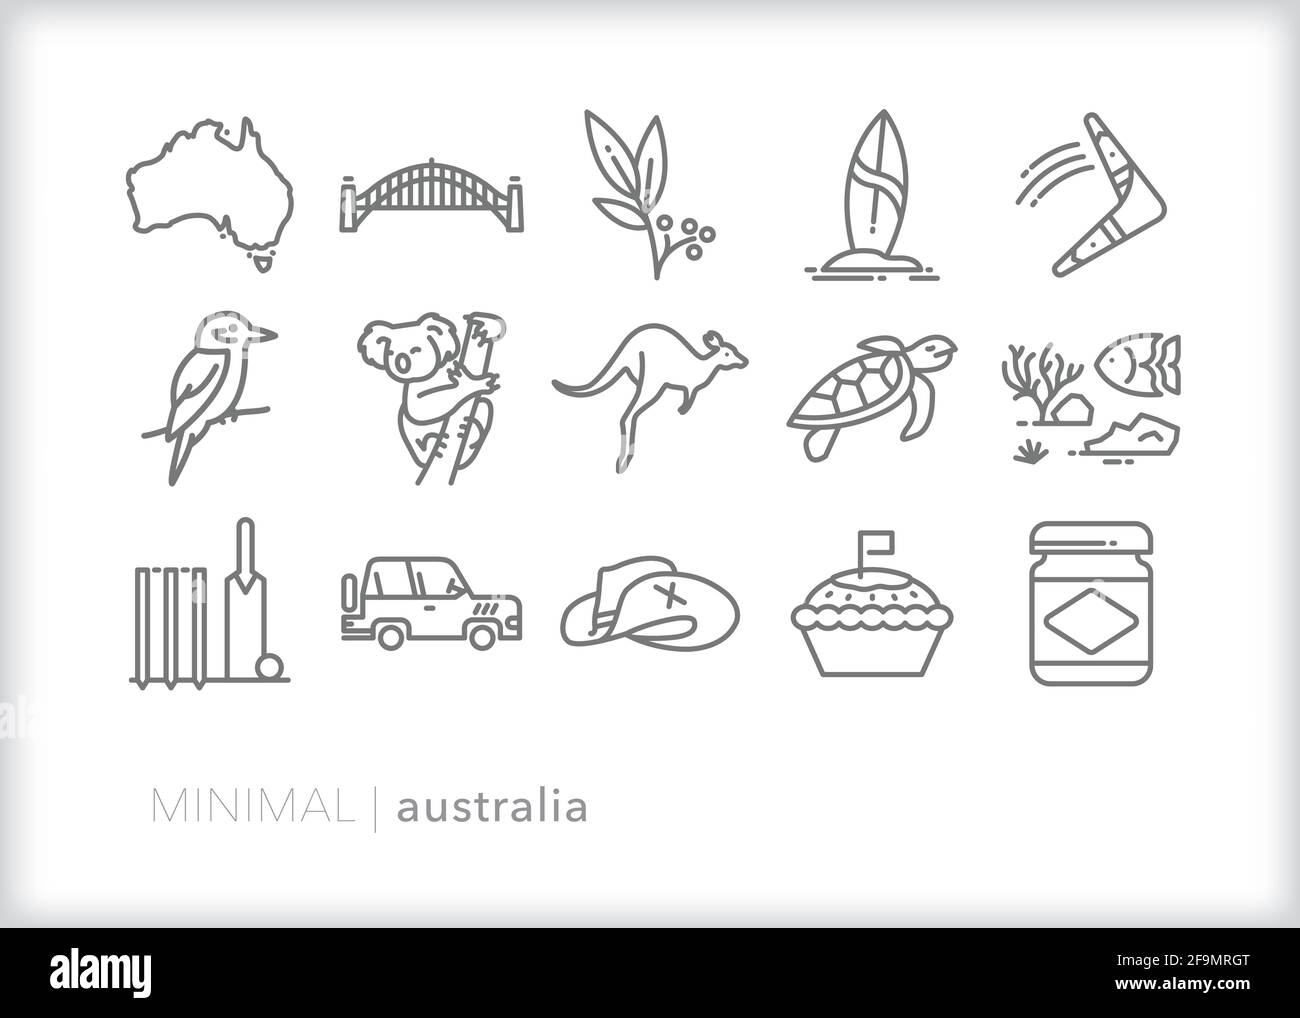 Australia line icon set of places, things and nature a tourist would see when traveling down under Stock Vector